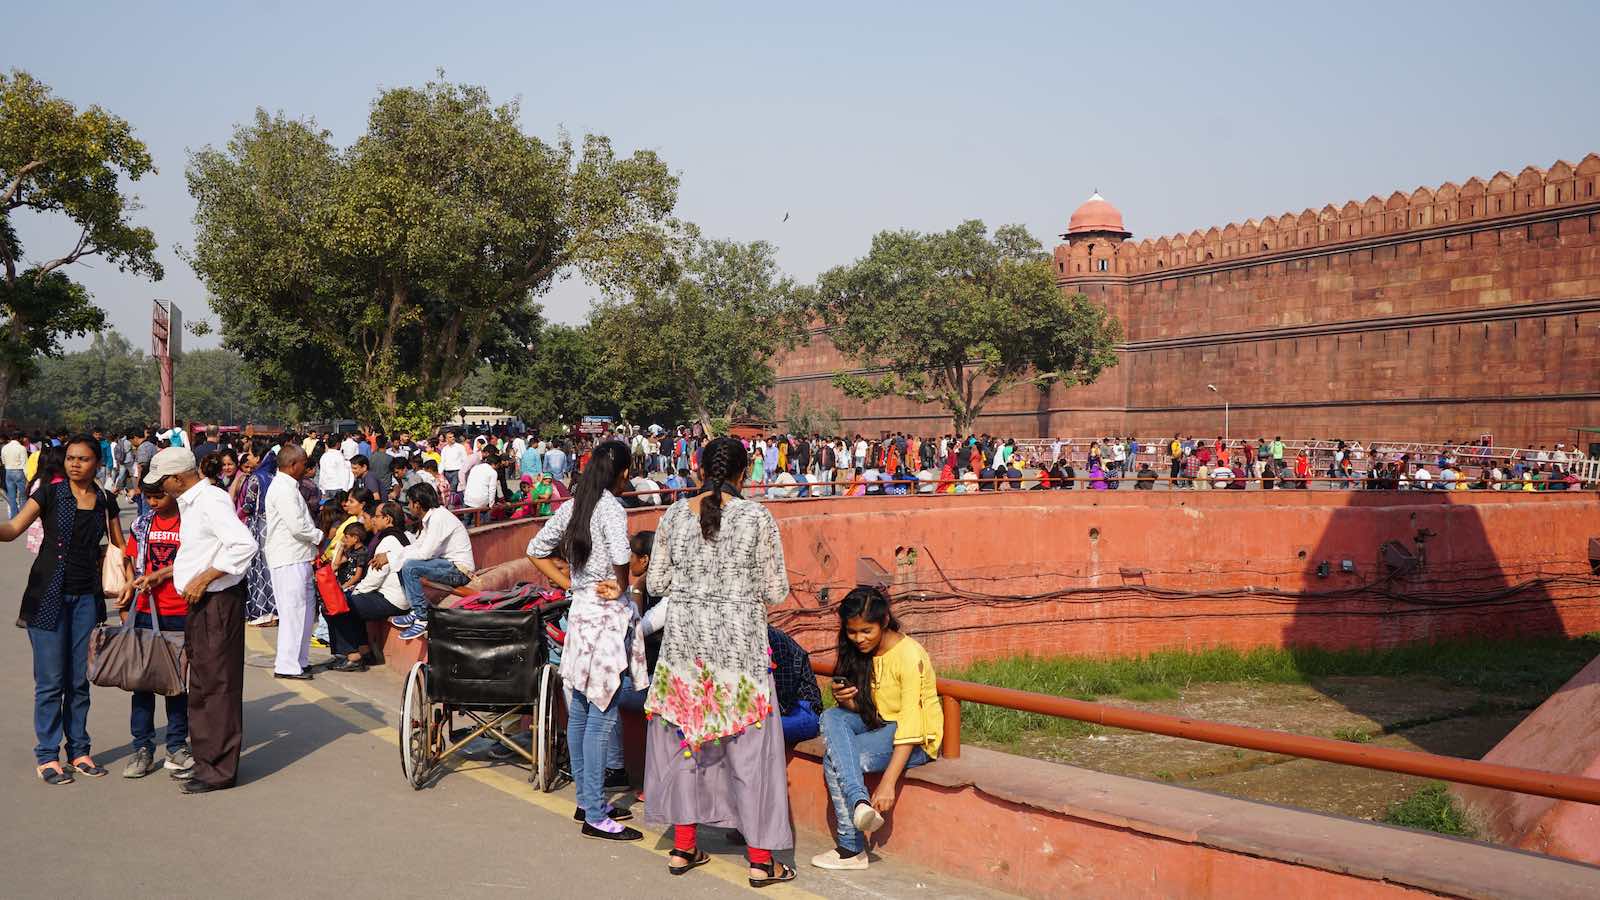 Got to the Red Fort but there was no way I was getting in. There must have been a hundred thousand people packed into this area and calling the queue for the ticketing booth overcrowded would've been an understatement. I just sat and people watched until I got too sweaty under the afternoon sun.